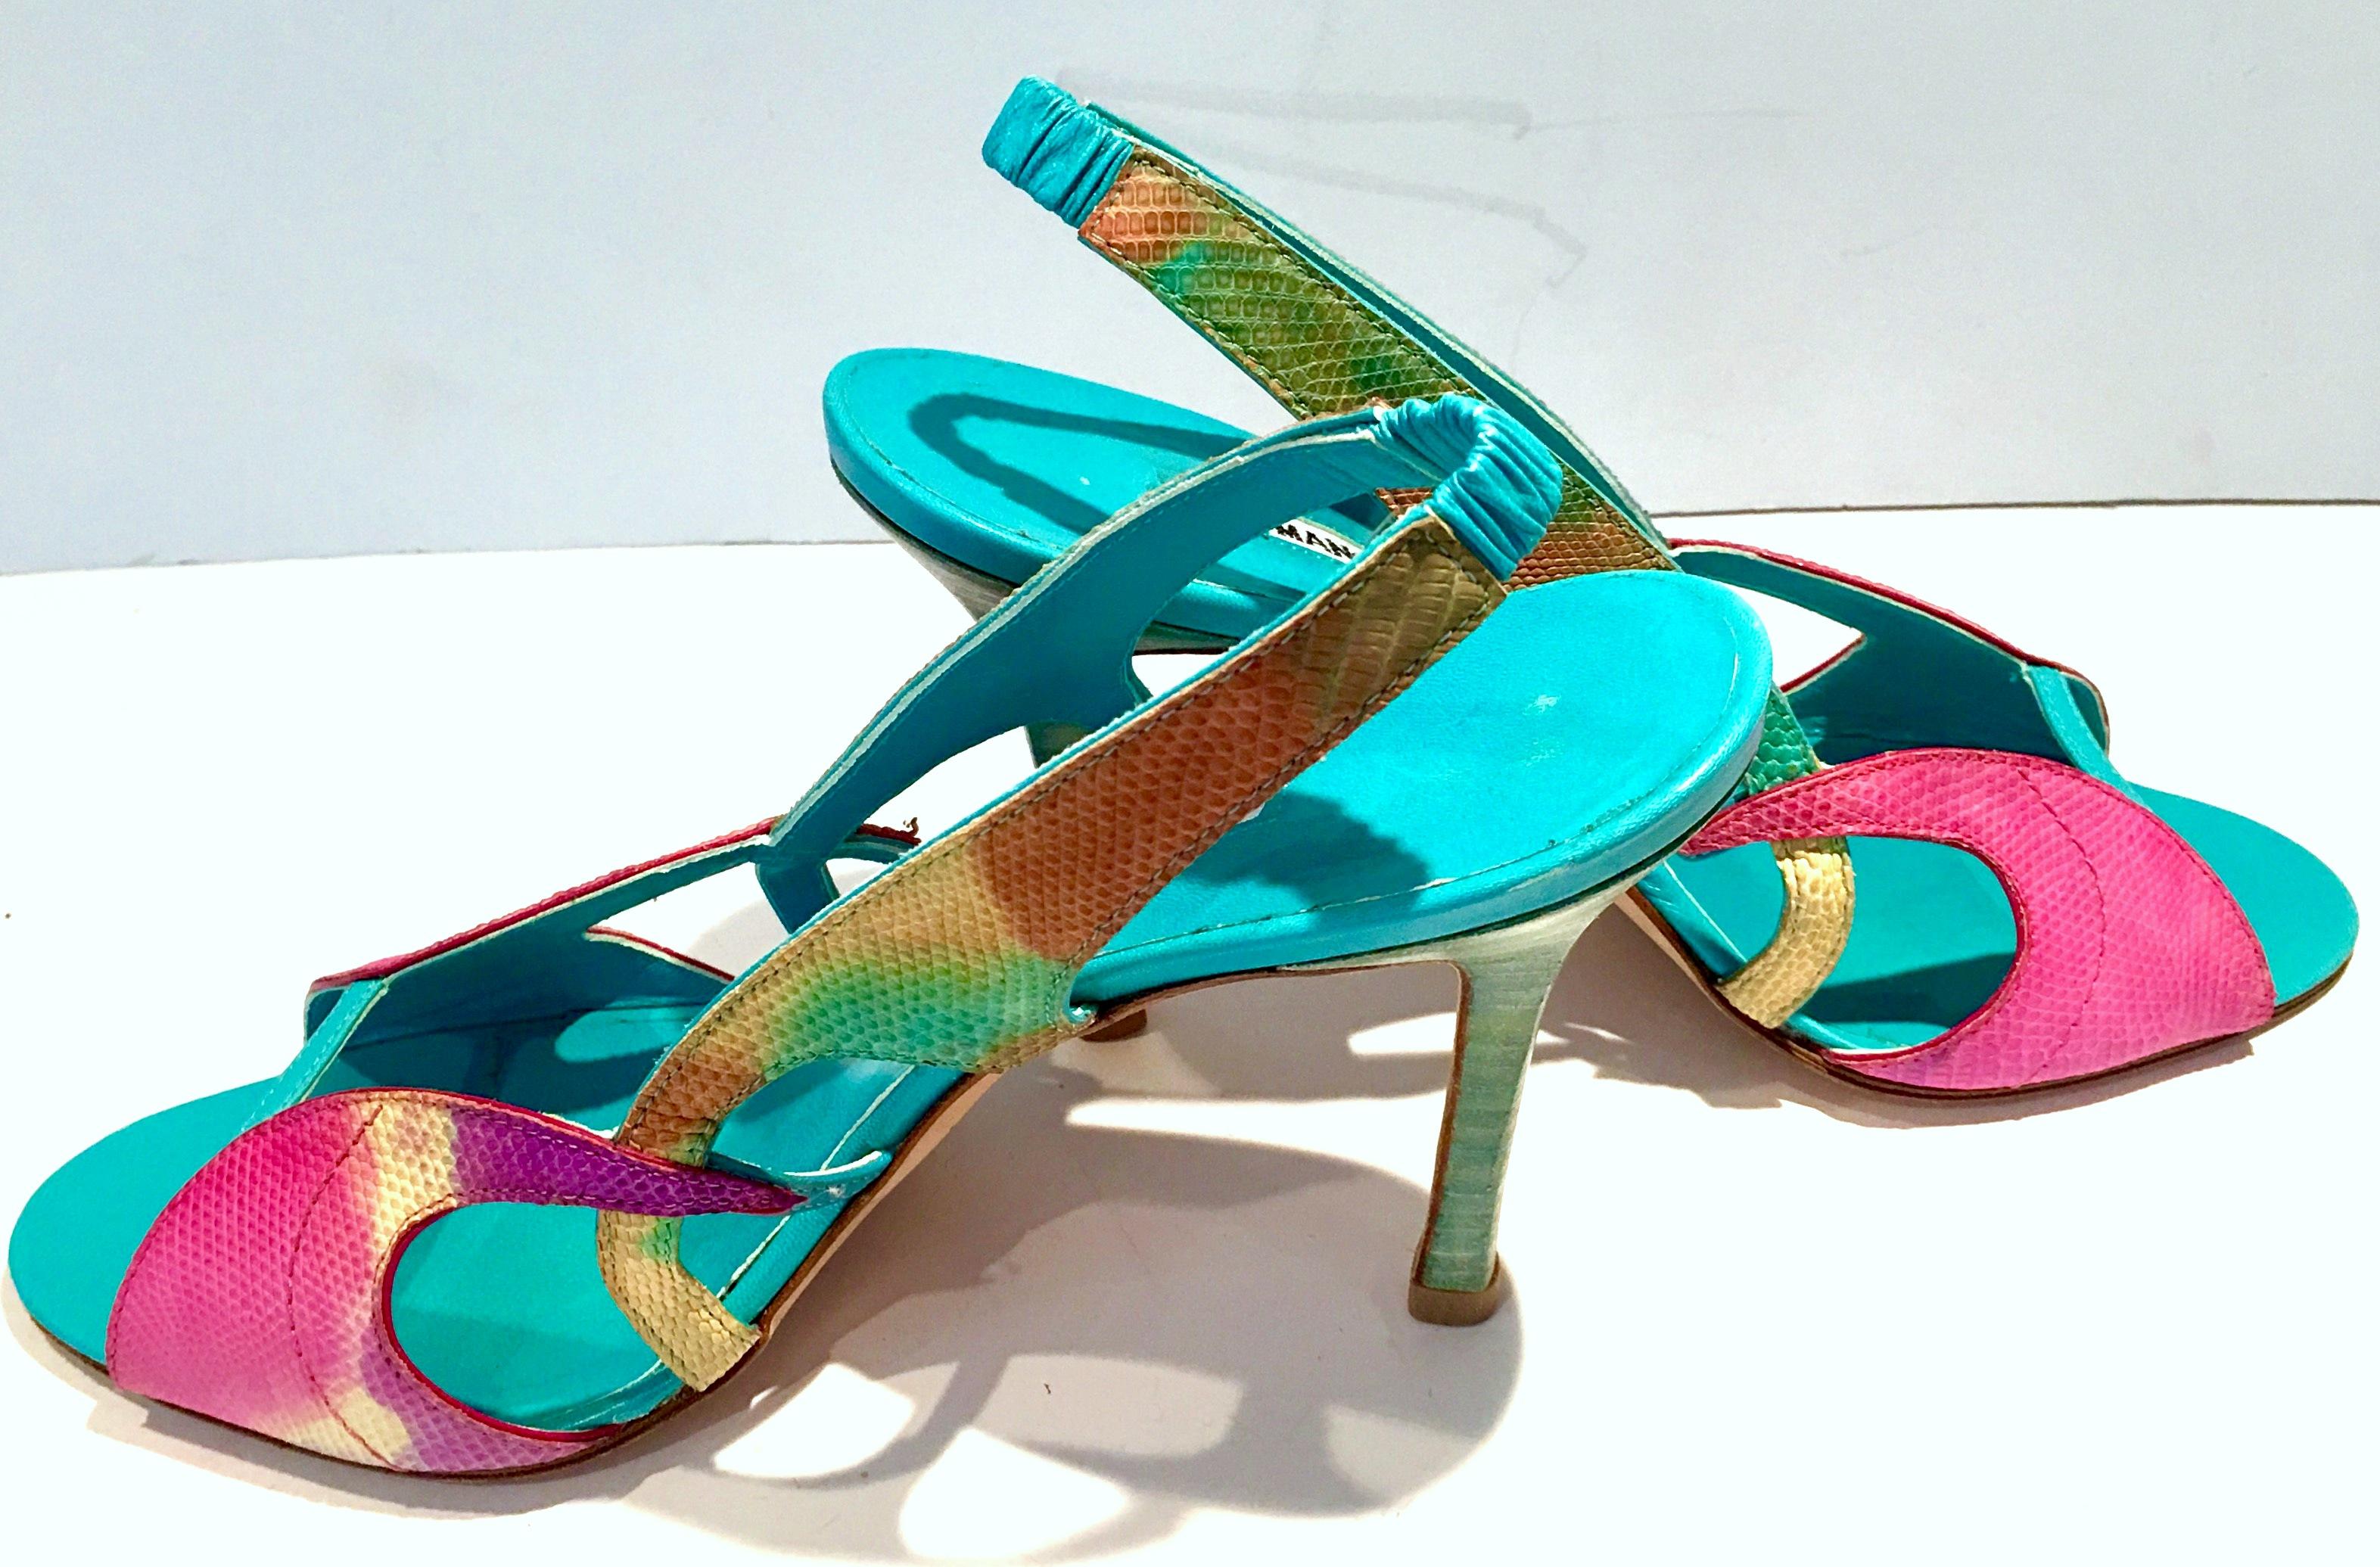 2013 New Pair Of Manolo Blahnik Multi-Color Python Sling Back Sandals In New Condition For Sale In West Palm Beach, FL